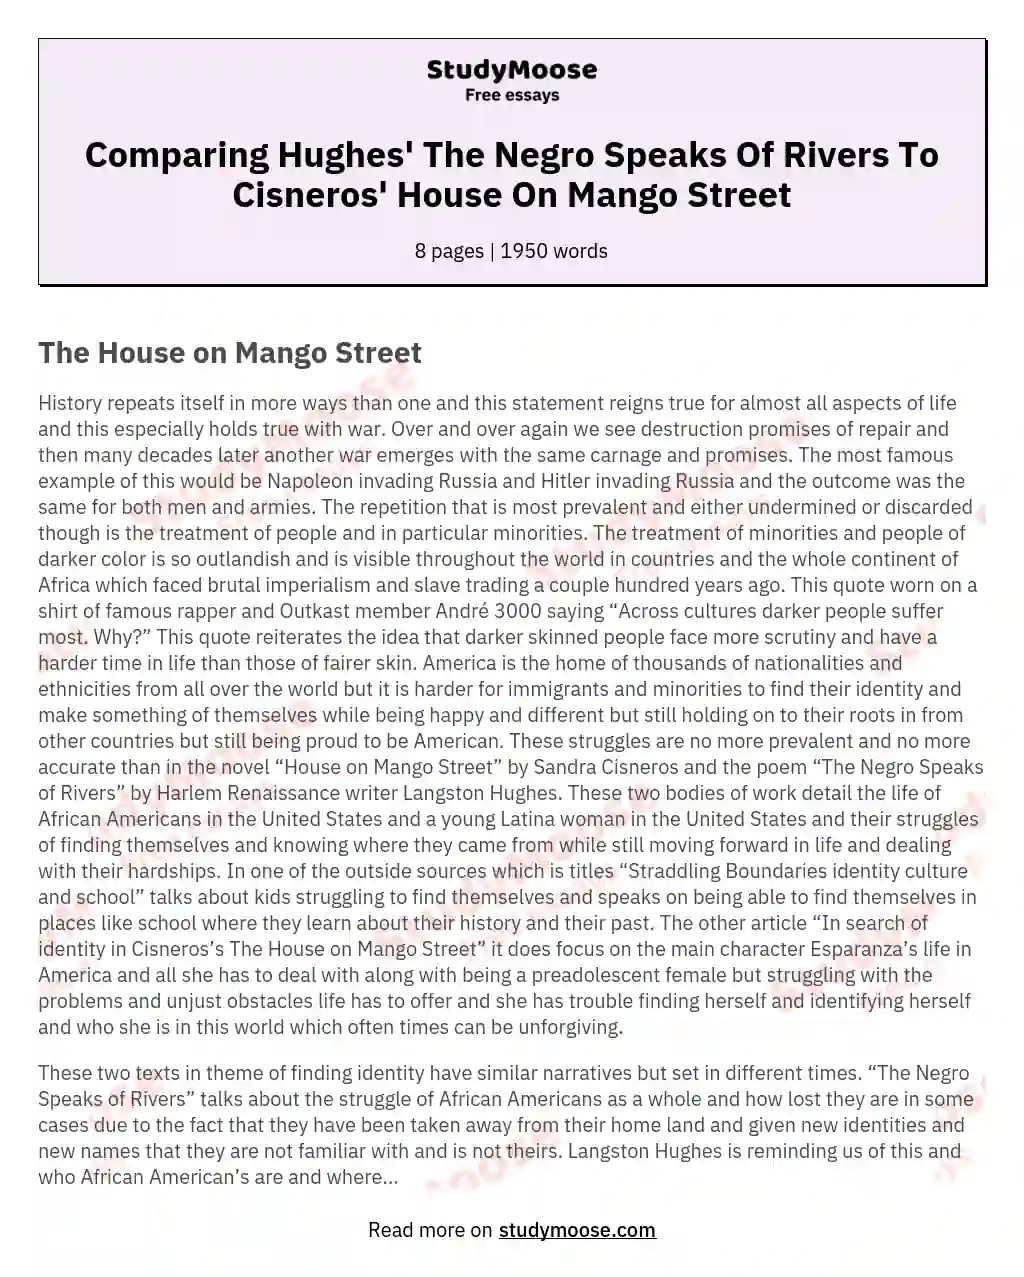 A Comparative Analysis Of Langston Hughes's The Negro Speaks Of Rivers And Sandra Cisneros's House On Mango Street